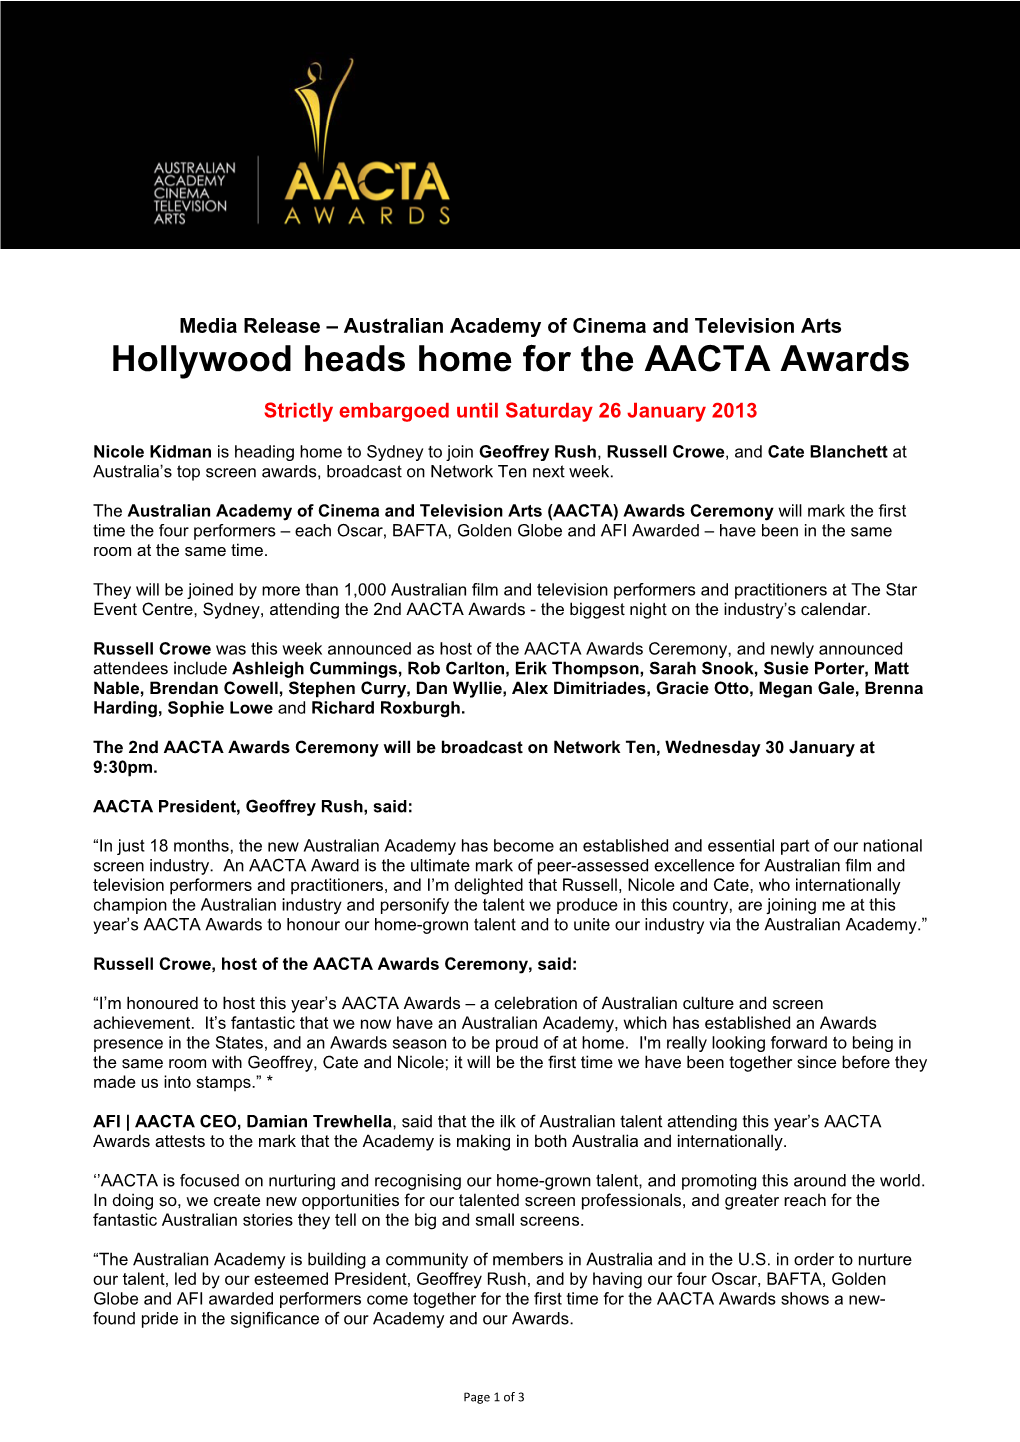 Hollywood Heads Home for the AACTA Awards